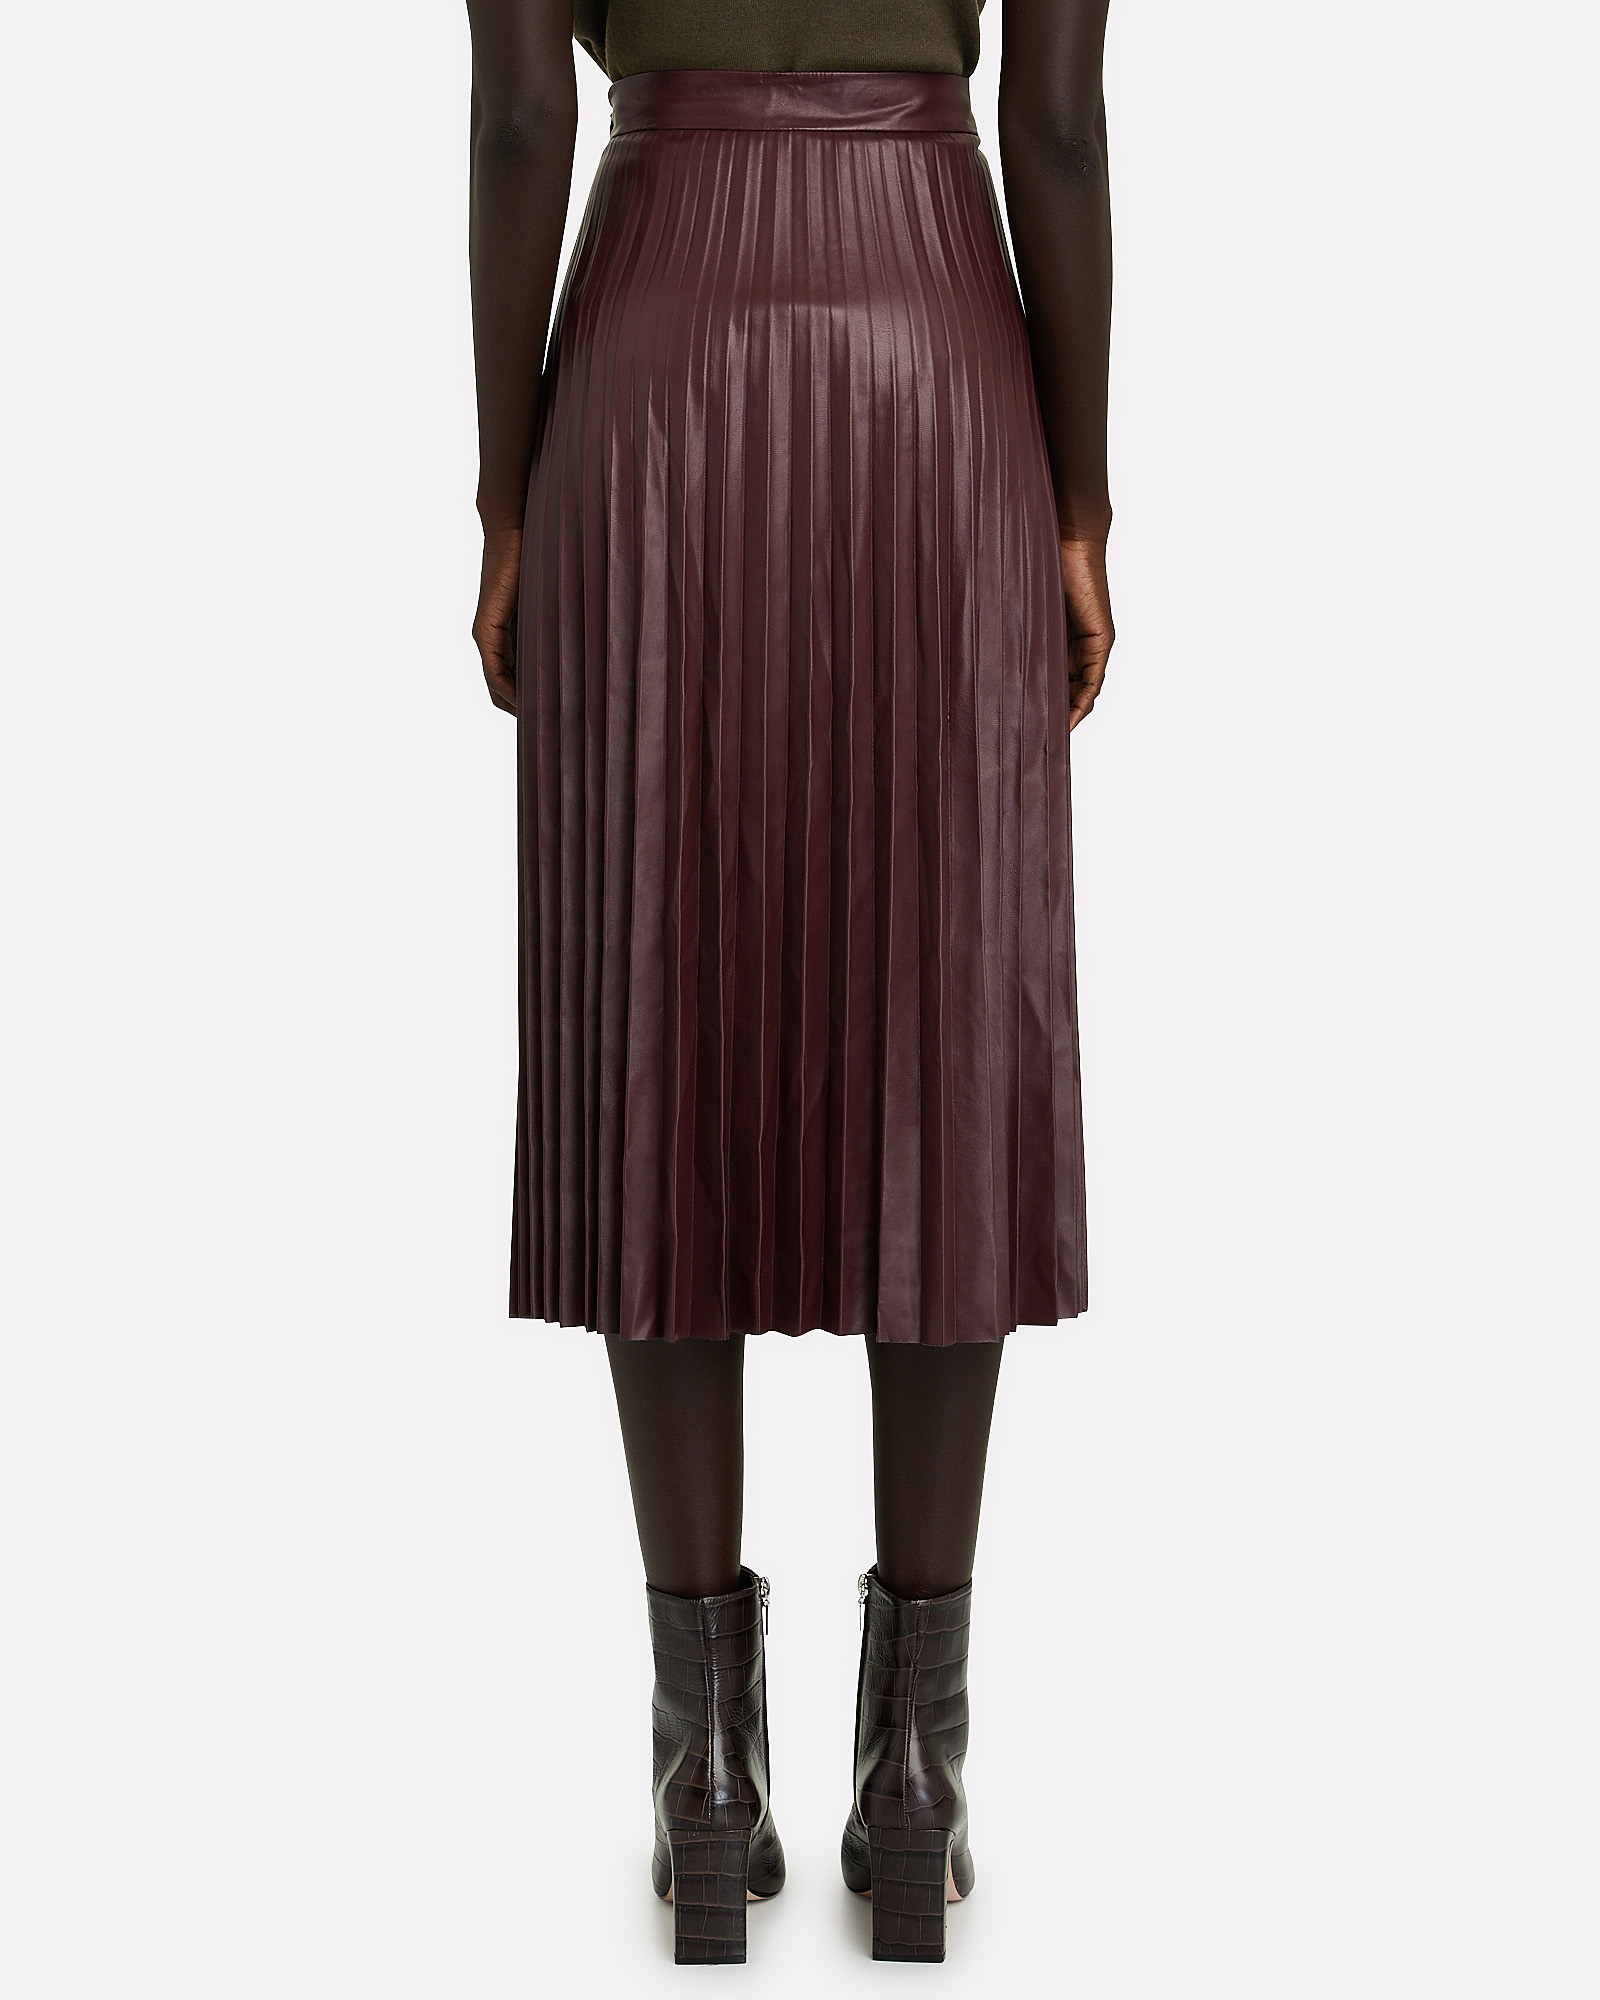 INTERMIX Private Label Pleated Faux Leather Skirt | INTERMIX®